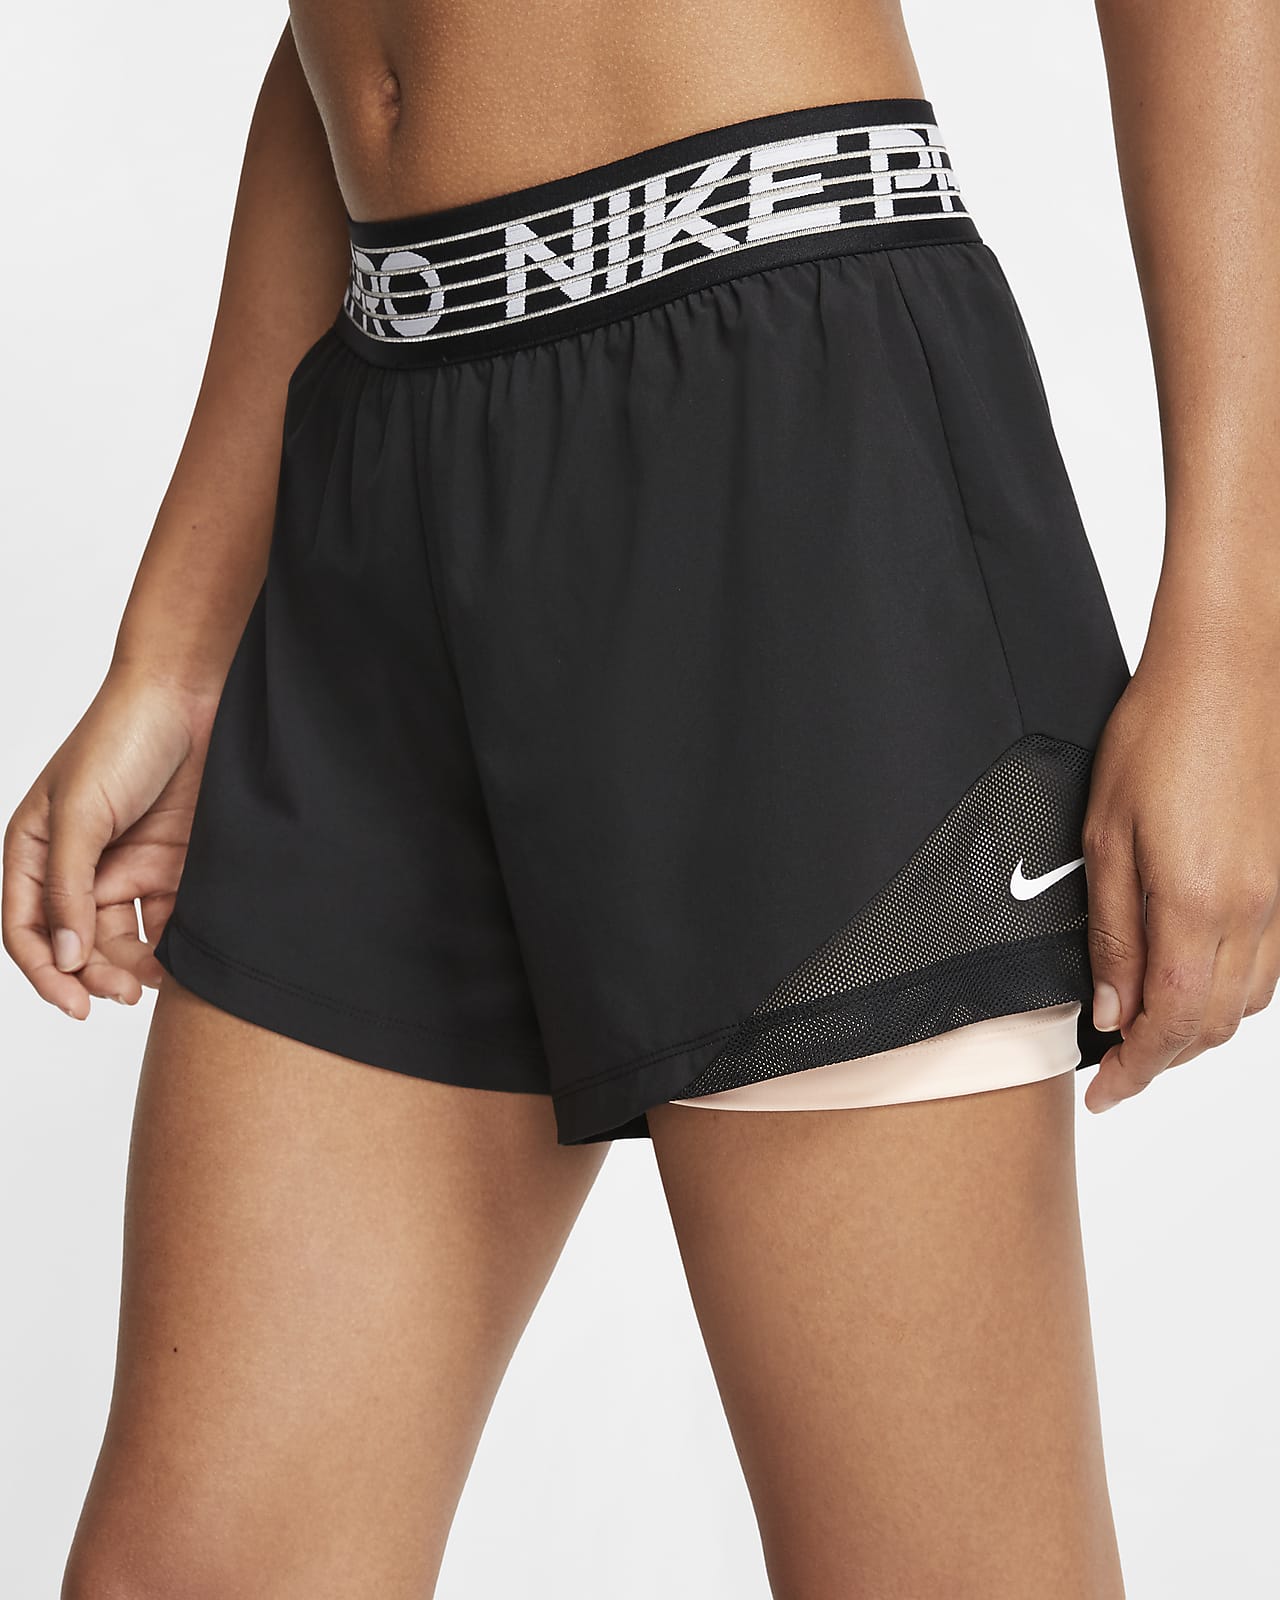 nike training flex 2 in 1 shorts in black and pink